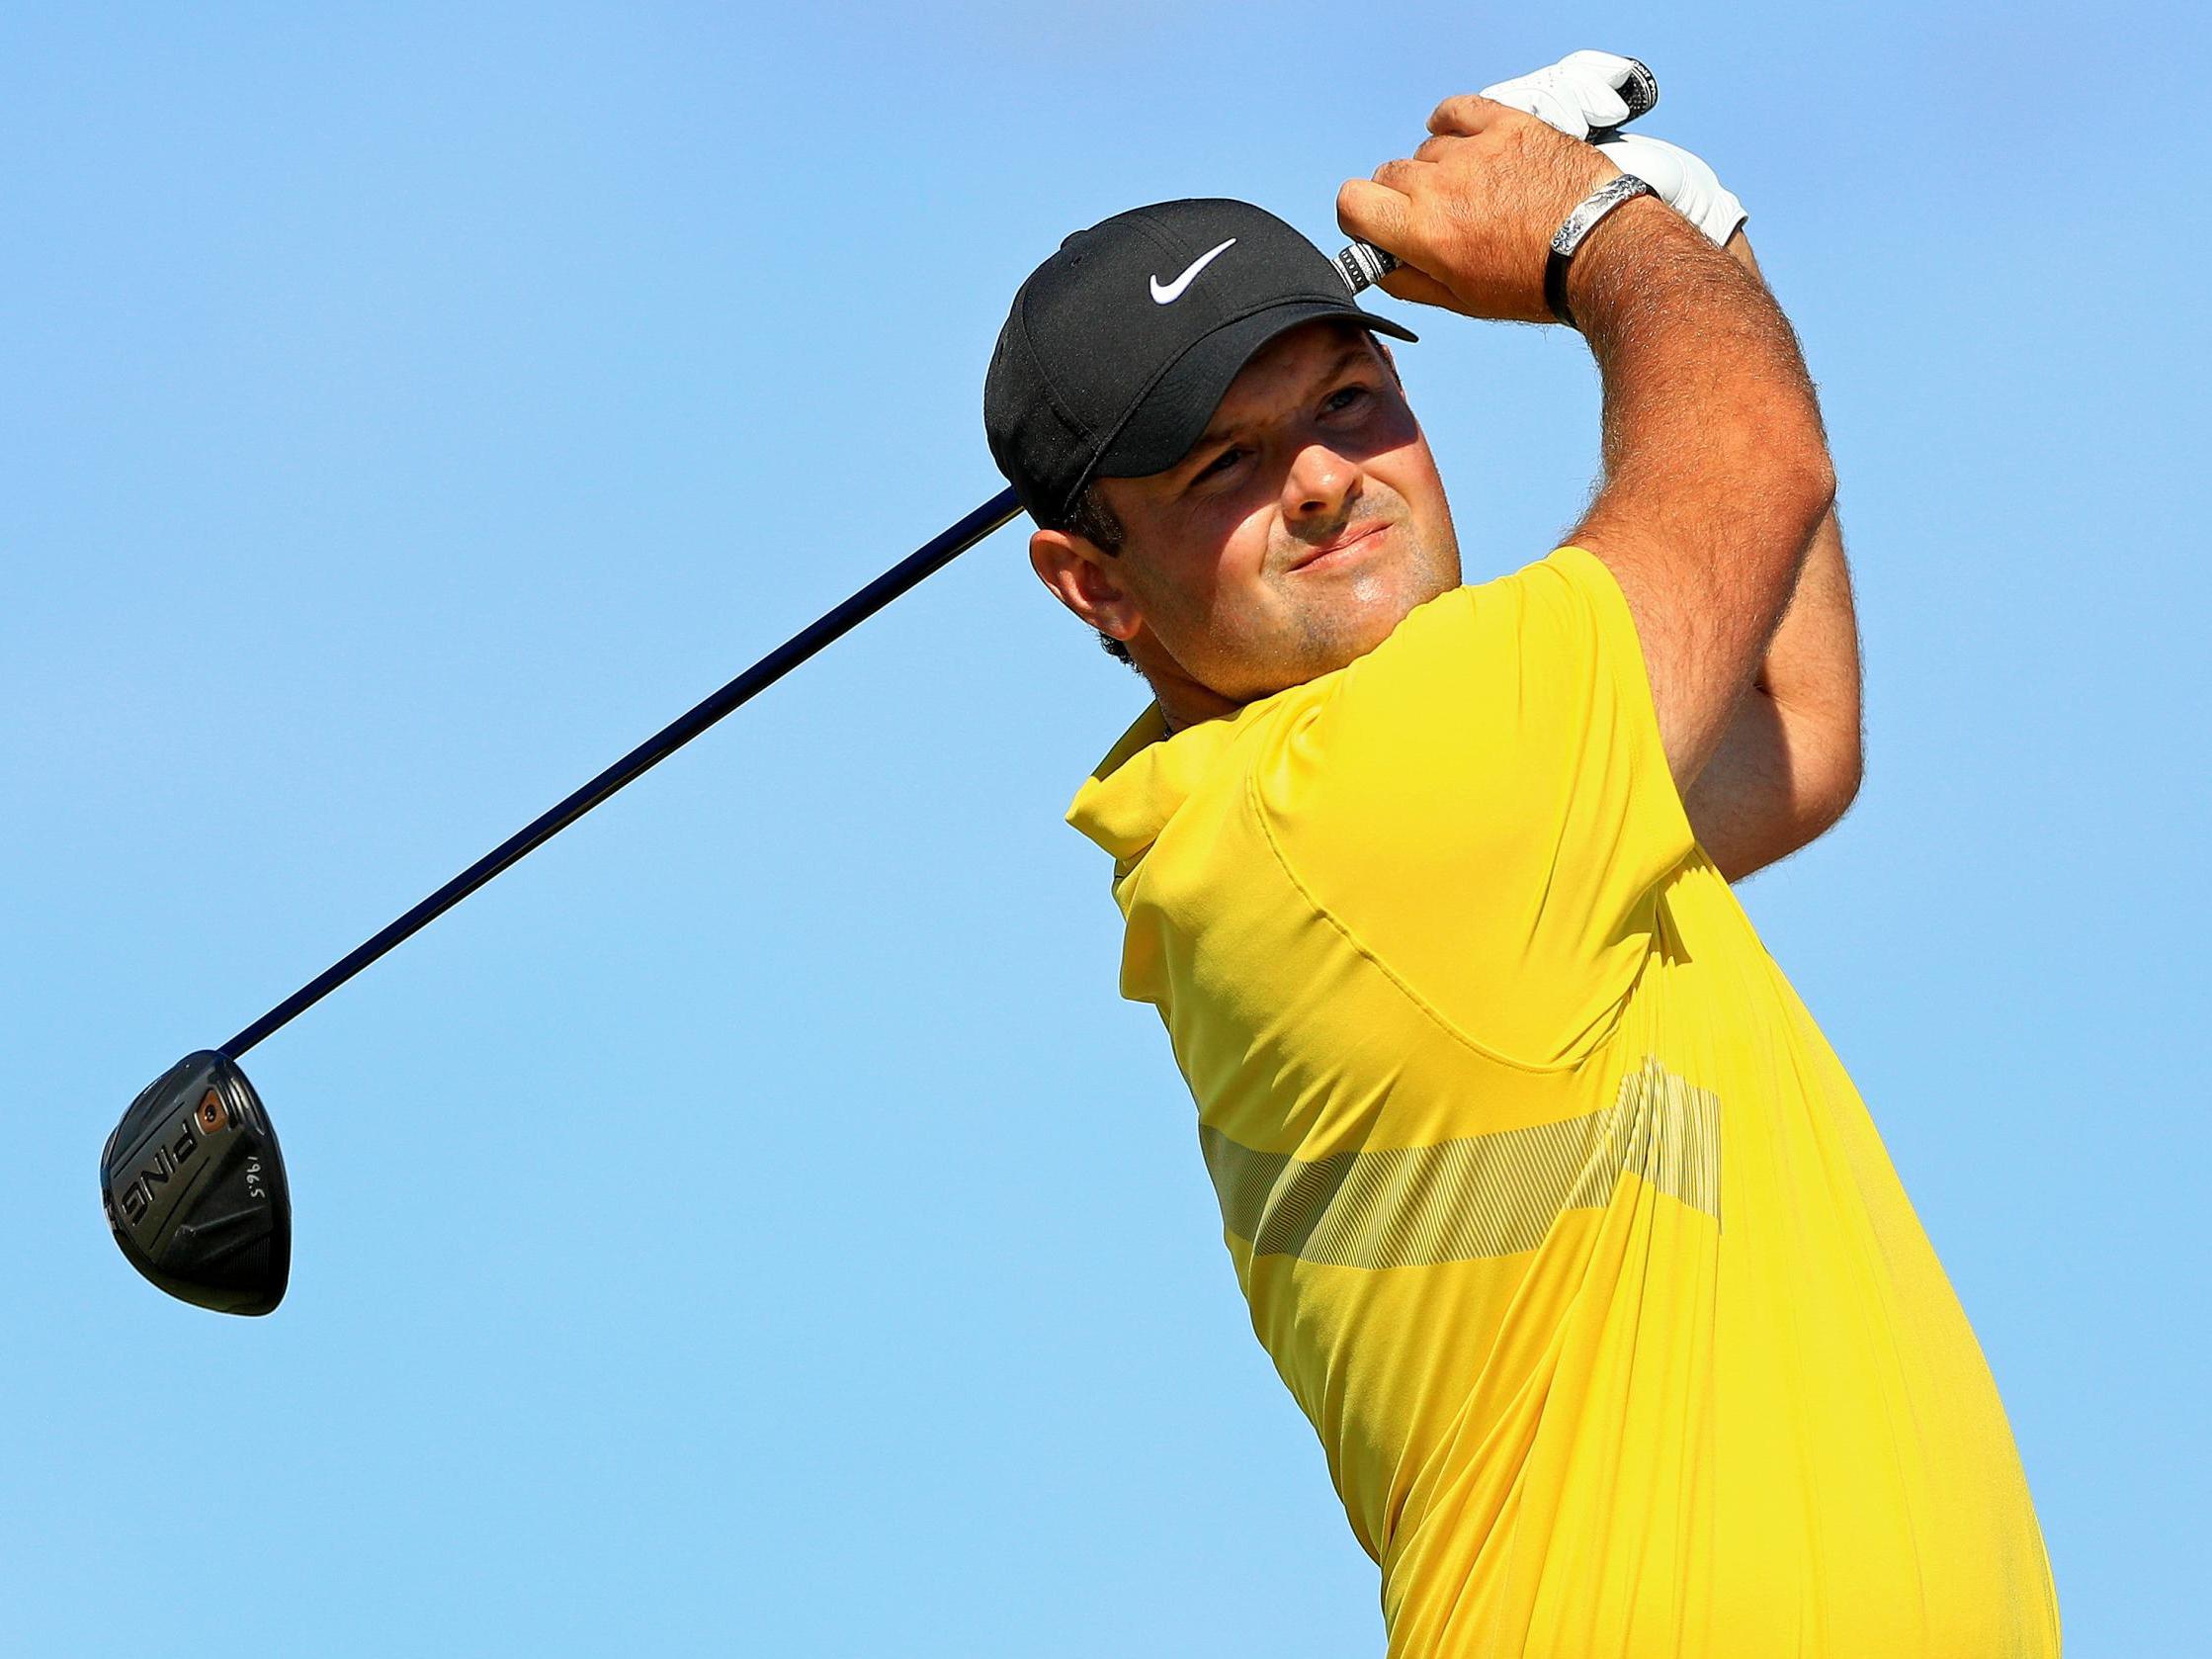 Patrick Reed was penalised two strokes after a rules violation during the third round in the Bahamas